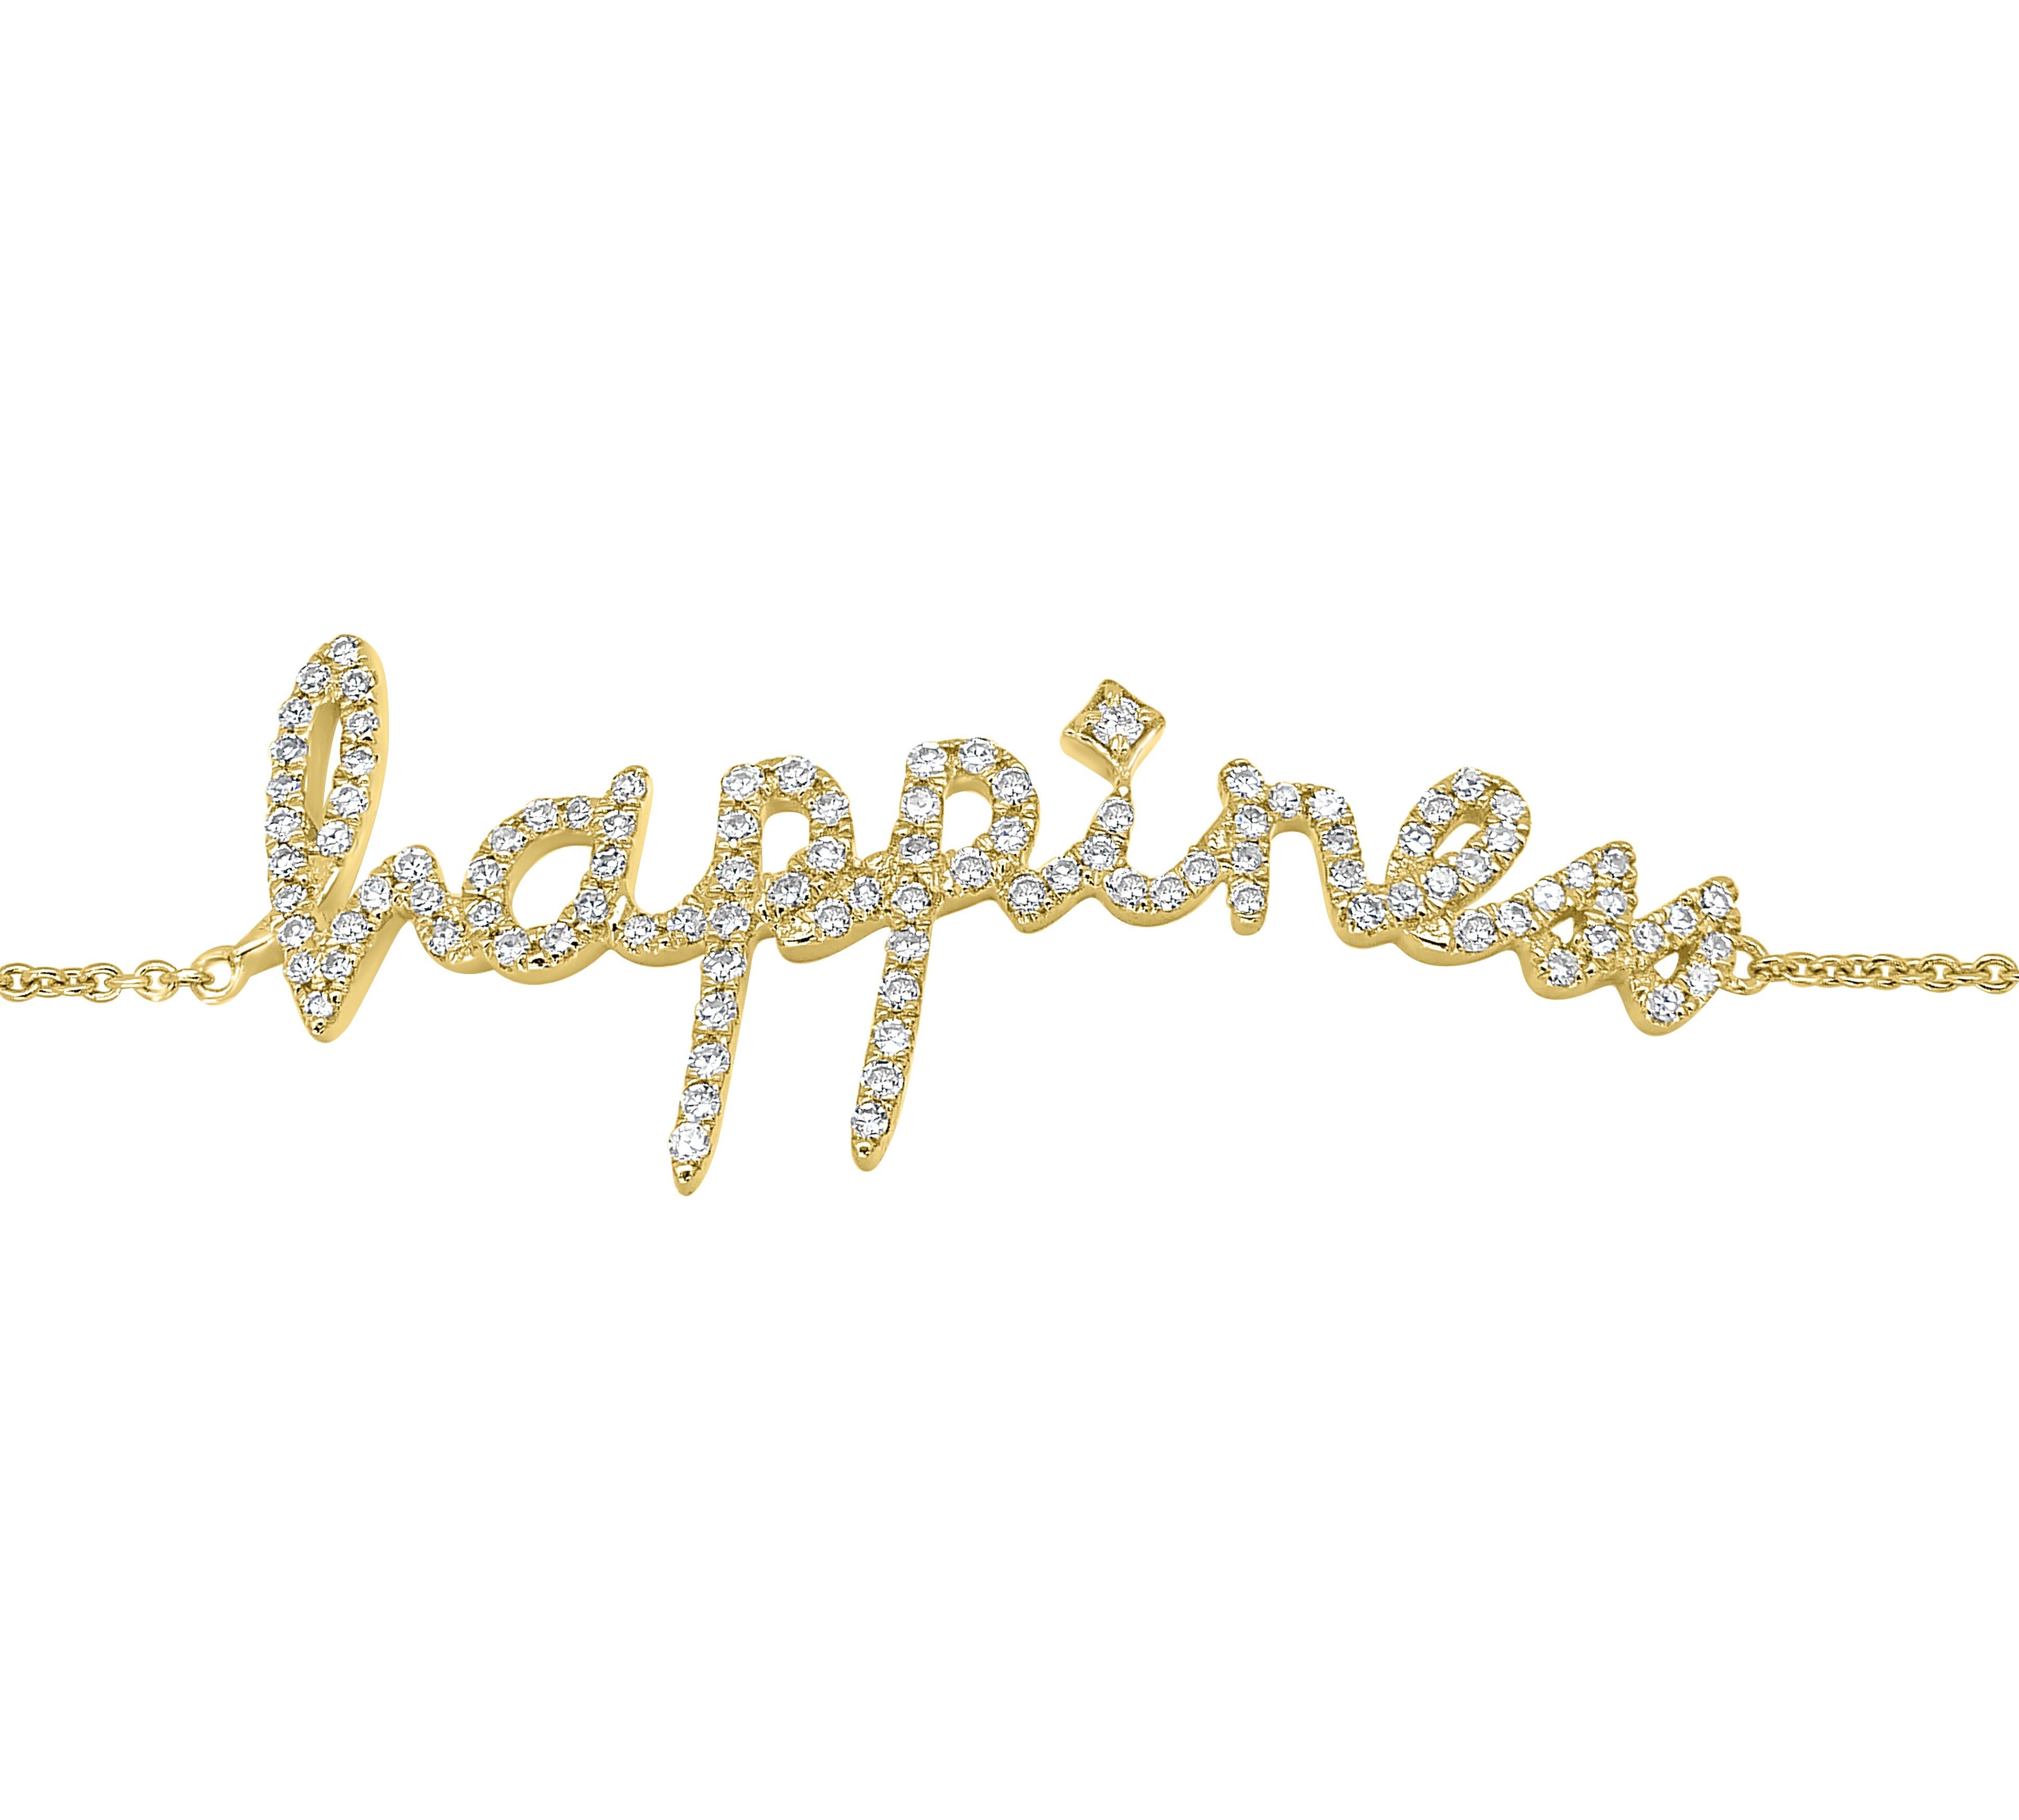 Feel the happiness flow through you whenever you look at this beautiful 14k gold bracelet adorned with stunning diamonds by Luxle. This happiness inscribed motif is encrusted with 0.30 carats of round full-cut and single-cut diamonds and comes with